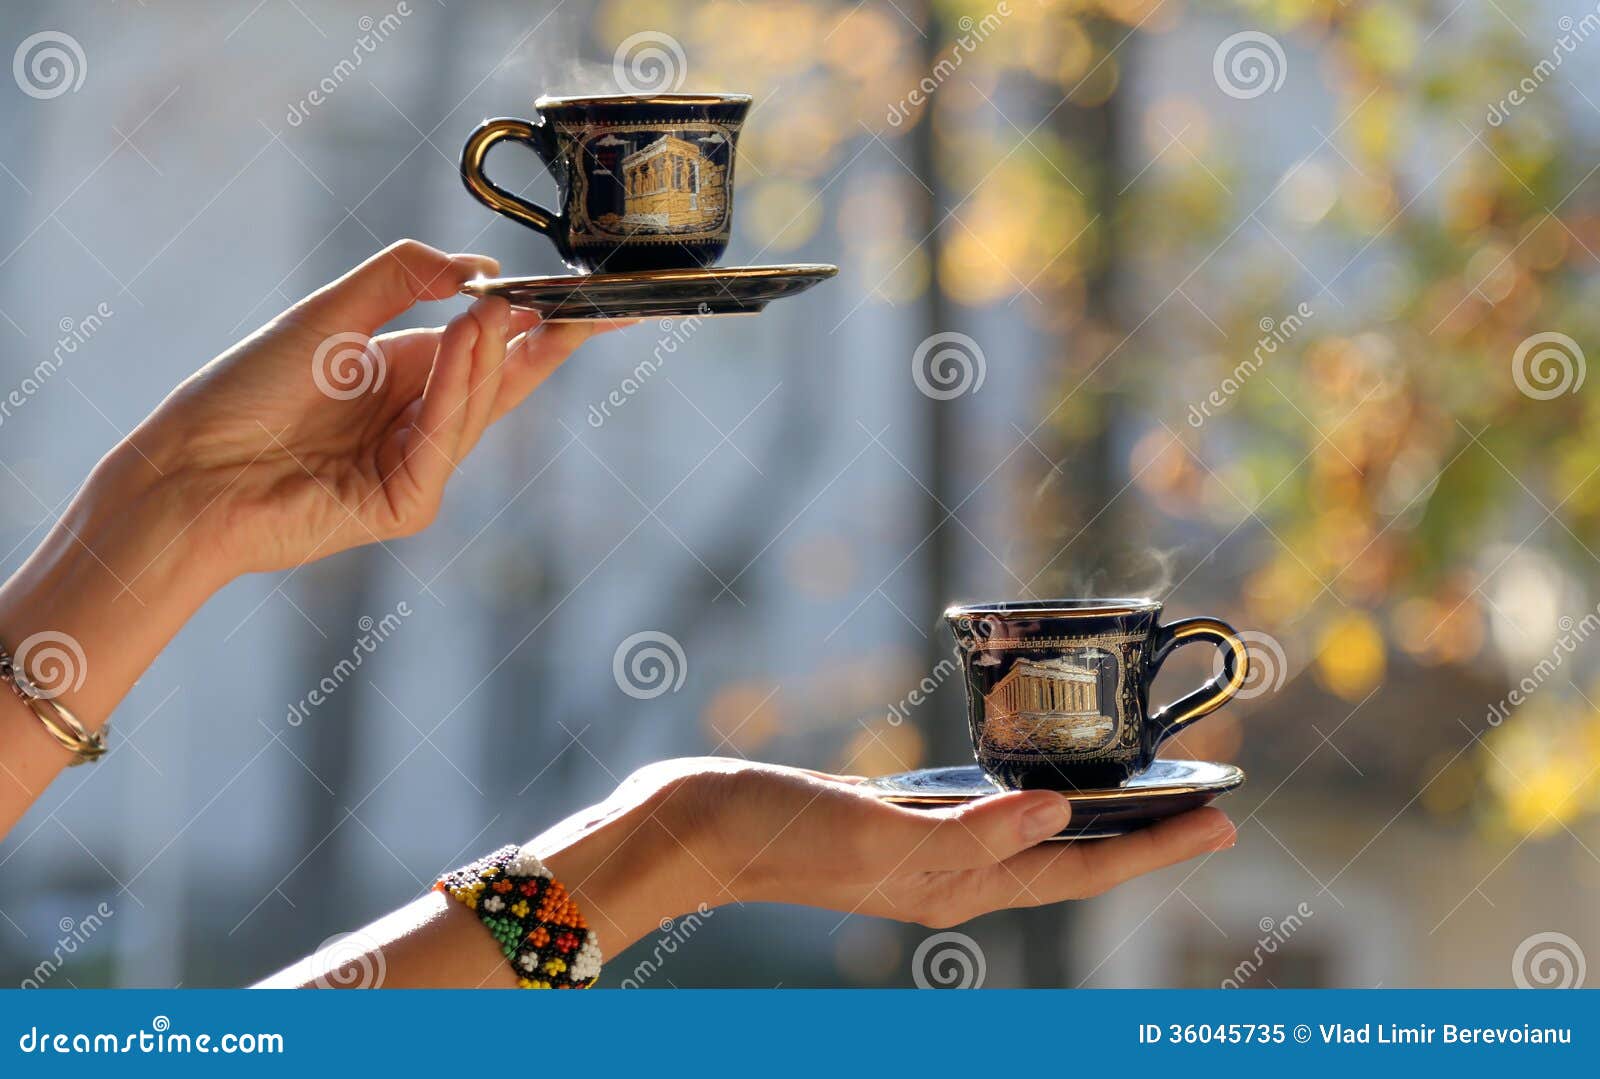 clipart serving coffee - photo #42